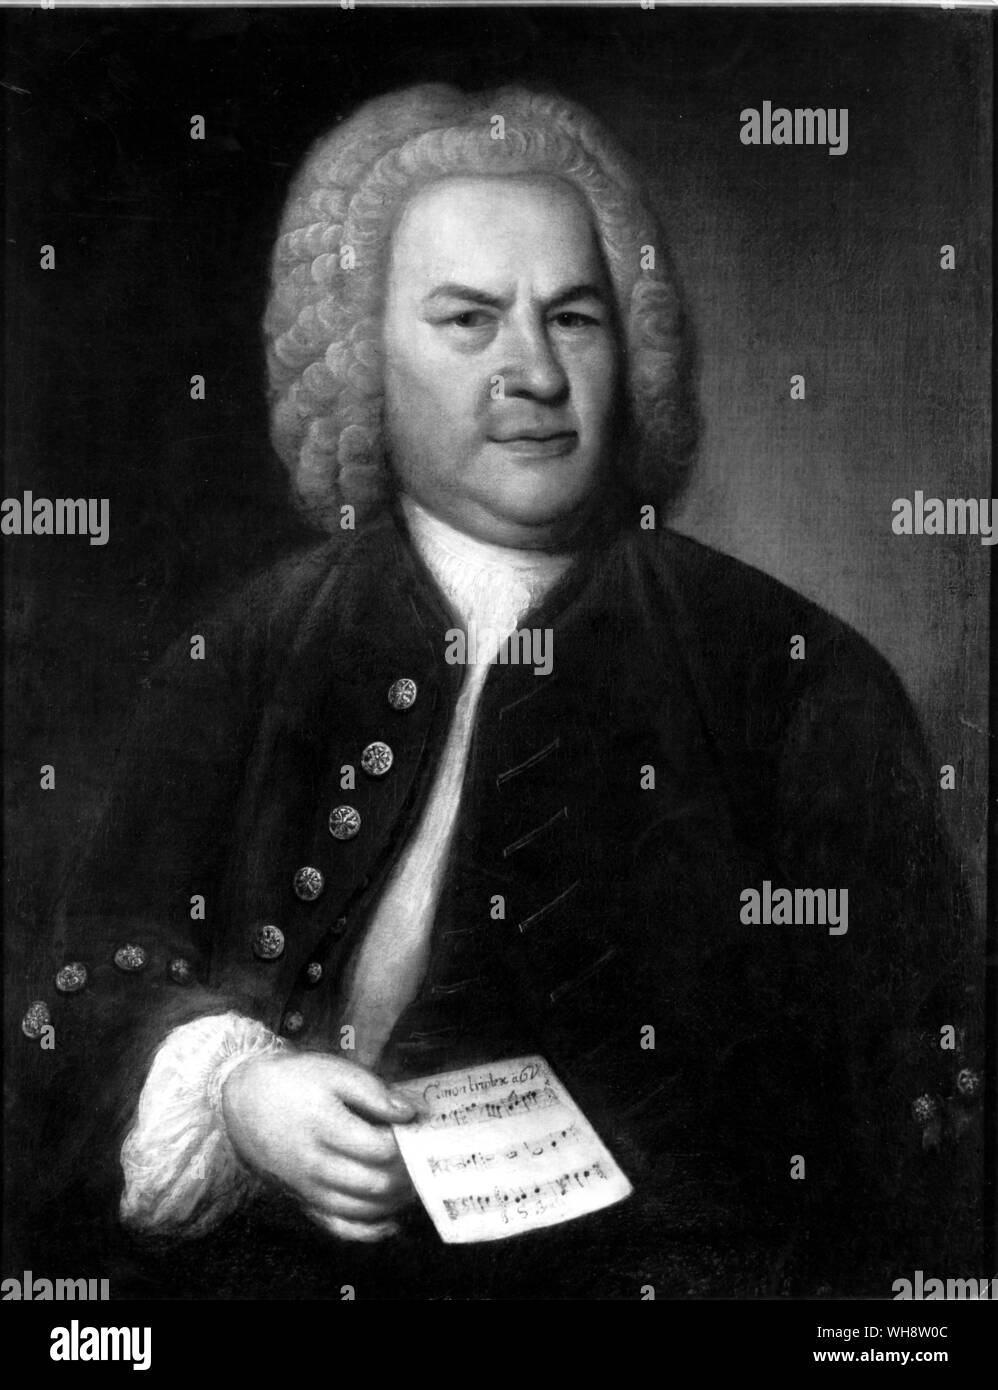 Painting of German composer Johann Sebastian Bach (1685-1750) by Elias Gottlob Haussmann 1746. Bach is shown from the waist up, holding a sheet of music. Frederick the Great by Nancy Mitford, page 154. Stock Photo